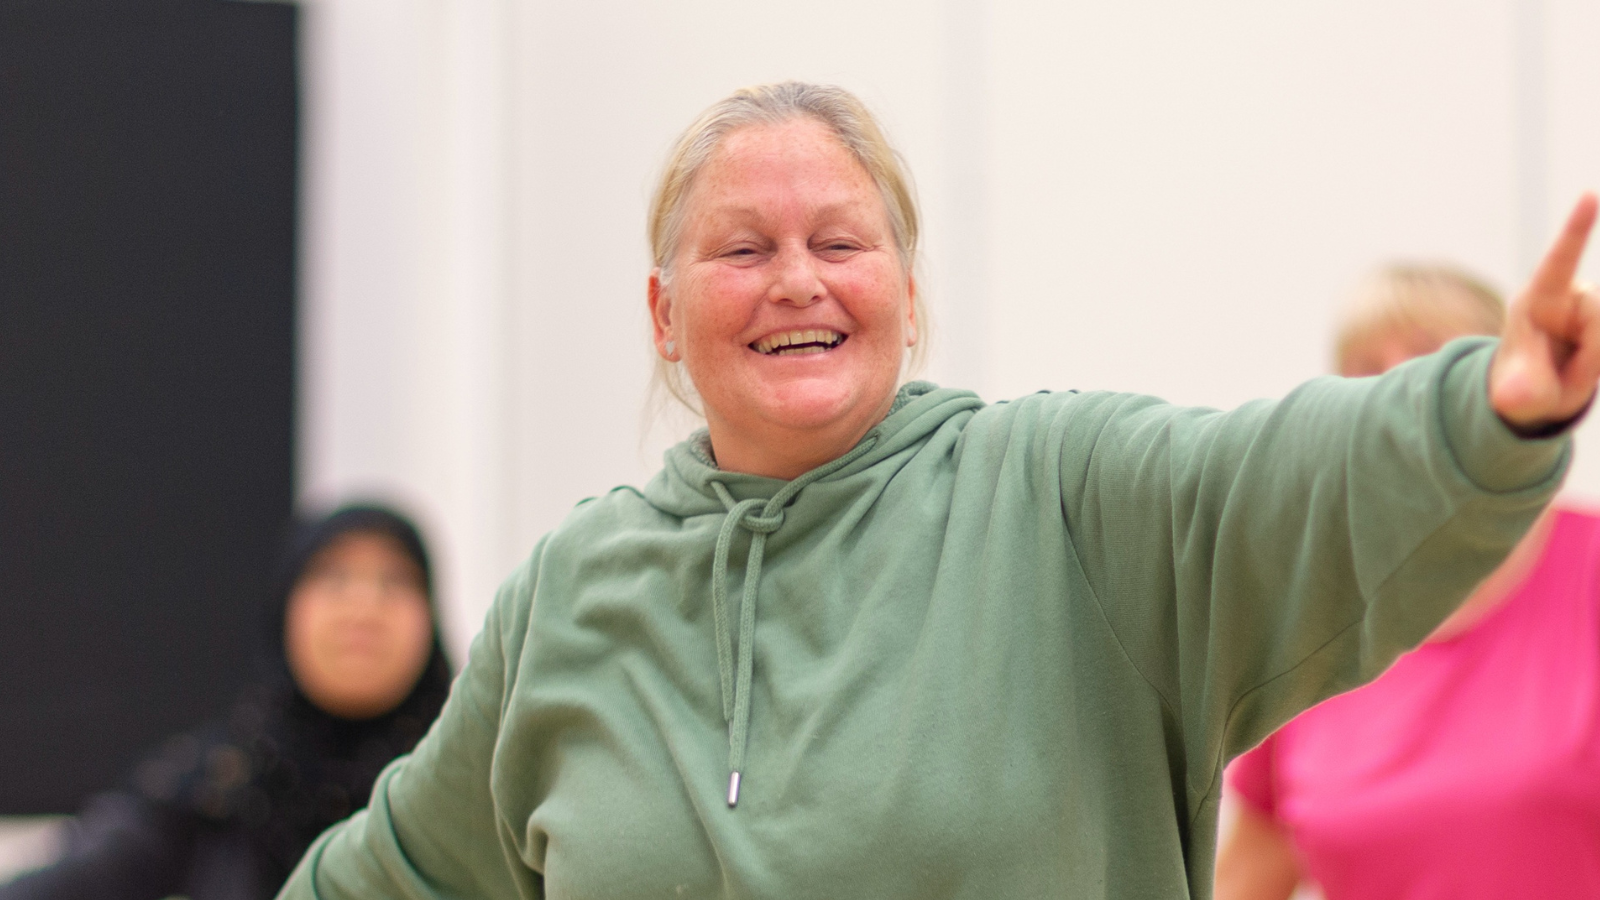 A person smiling during a wellbeing class with their left hand in the air pointing